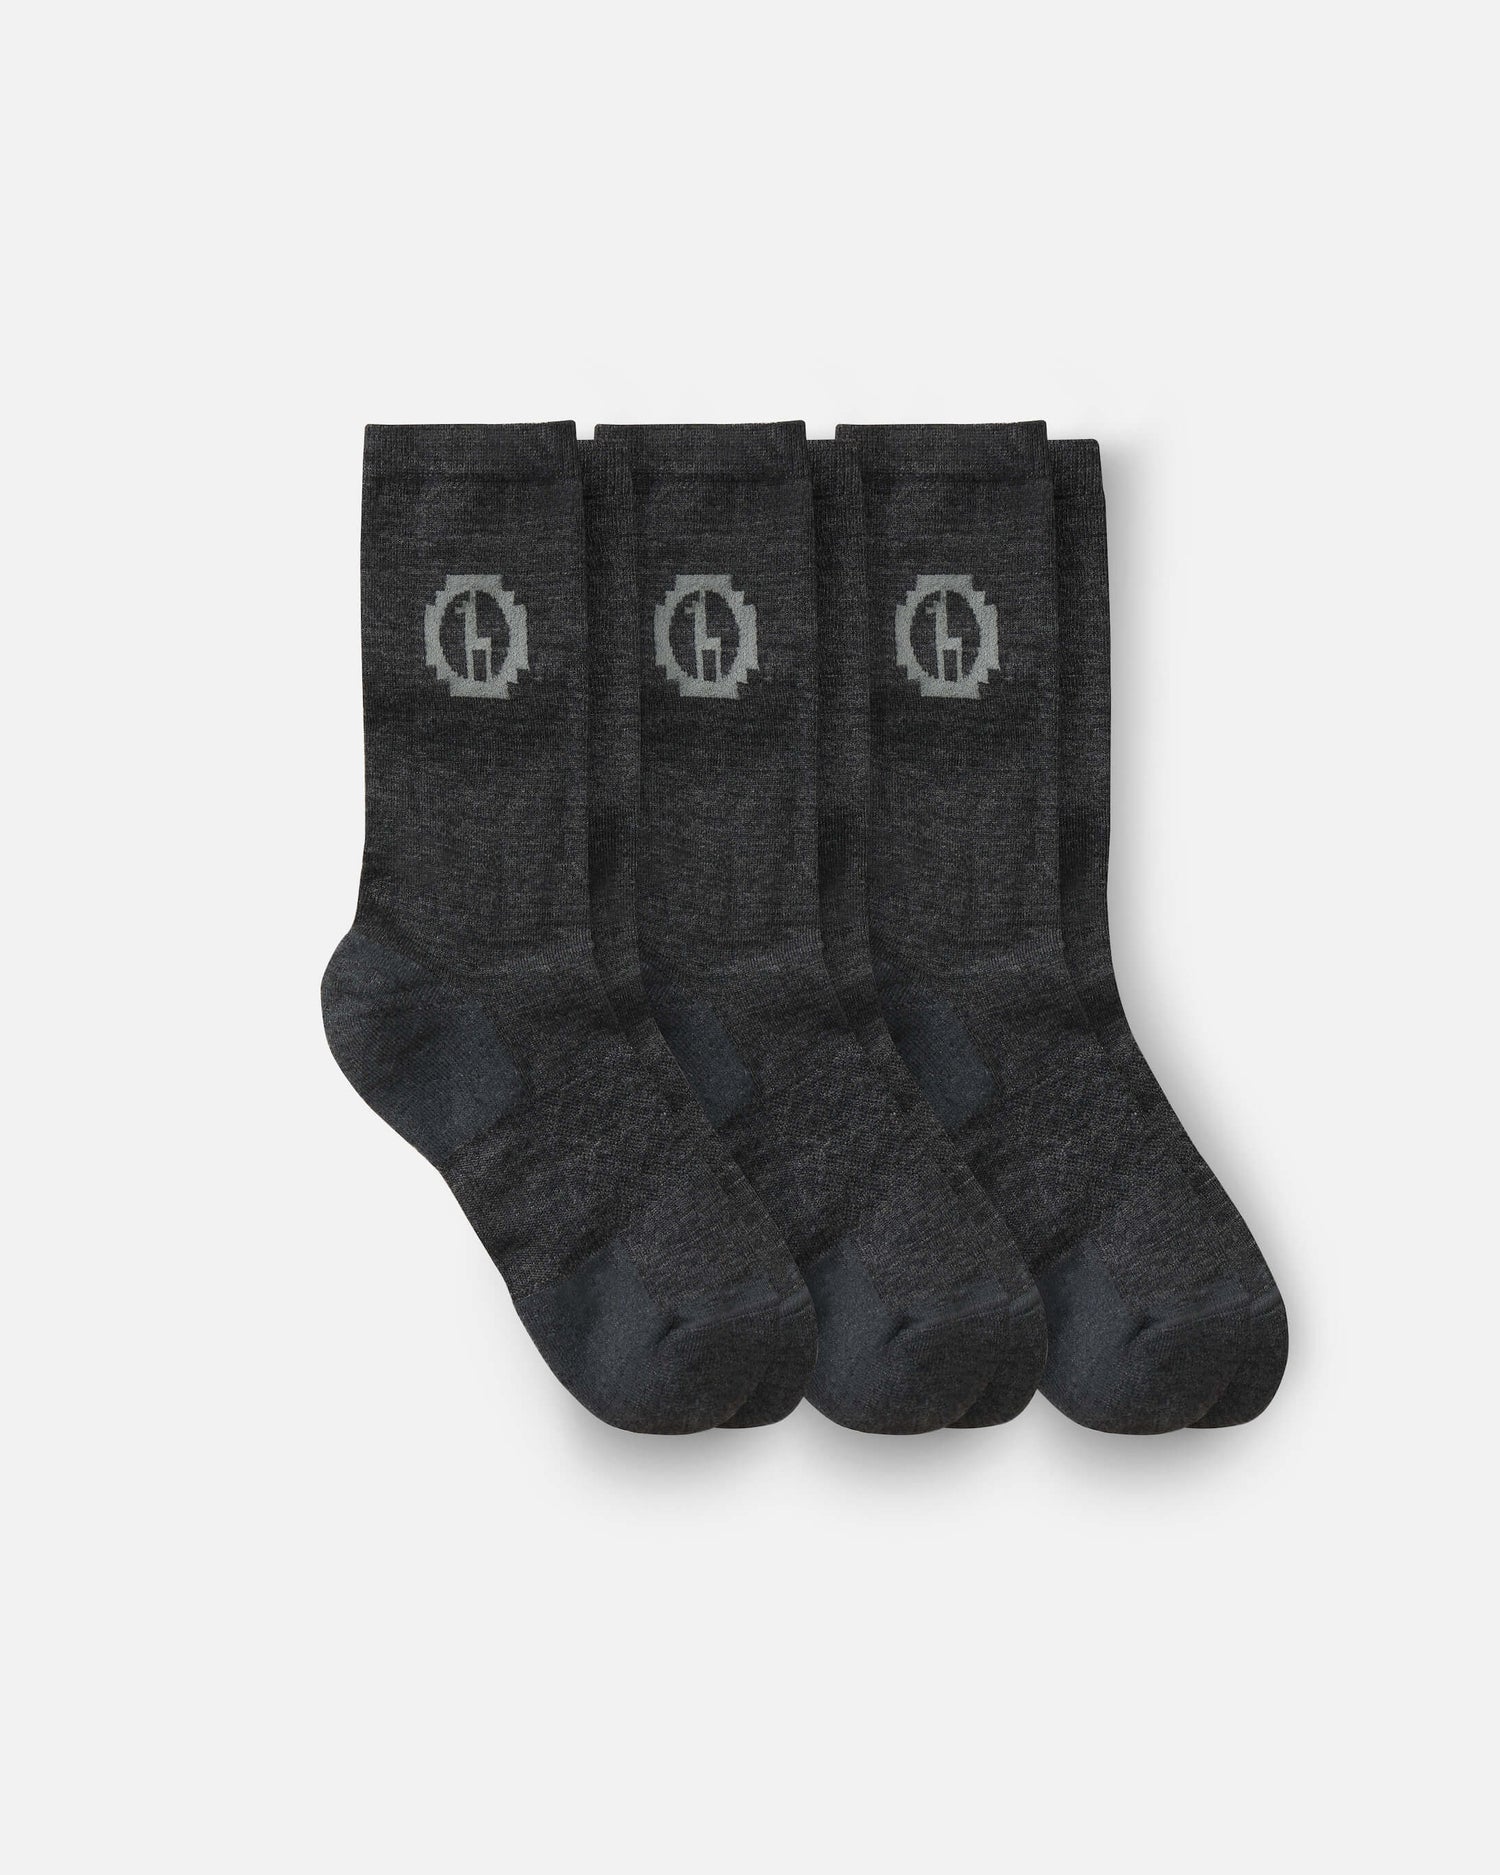 Socks With LV Logo At Front Grey/Dark Grey/Blue/Black And Red/Green - 5  Pairs